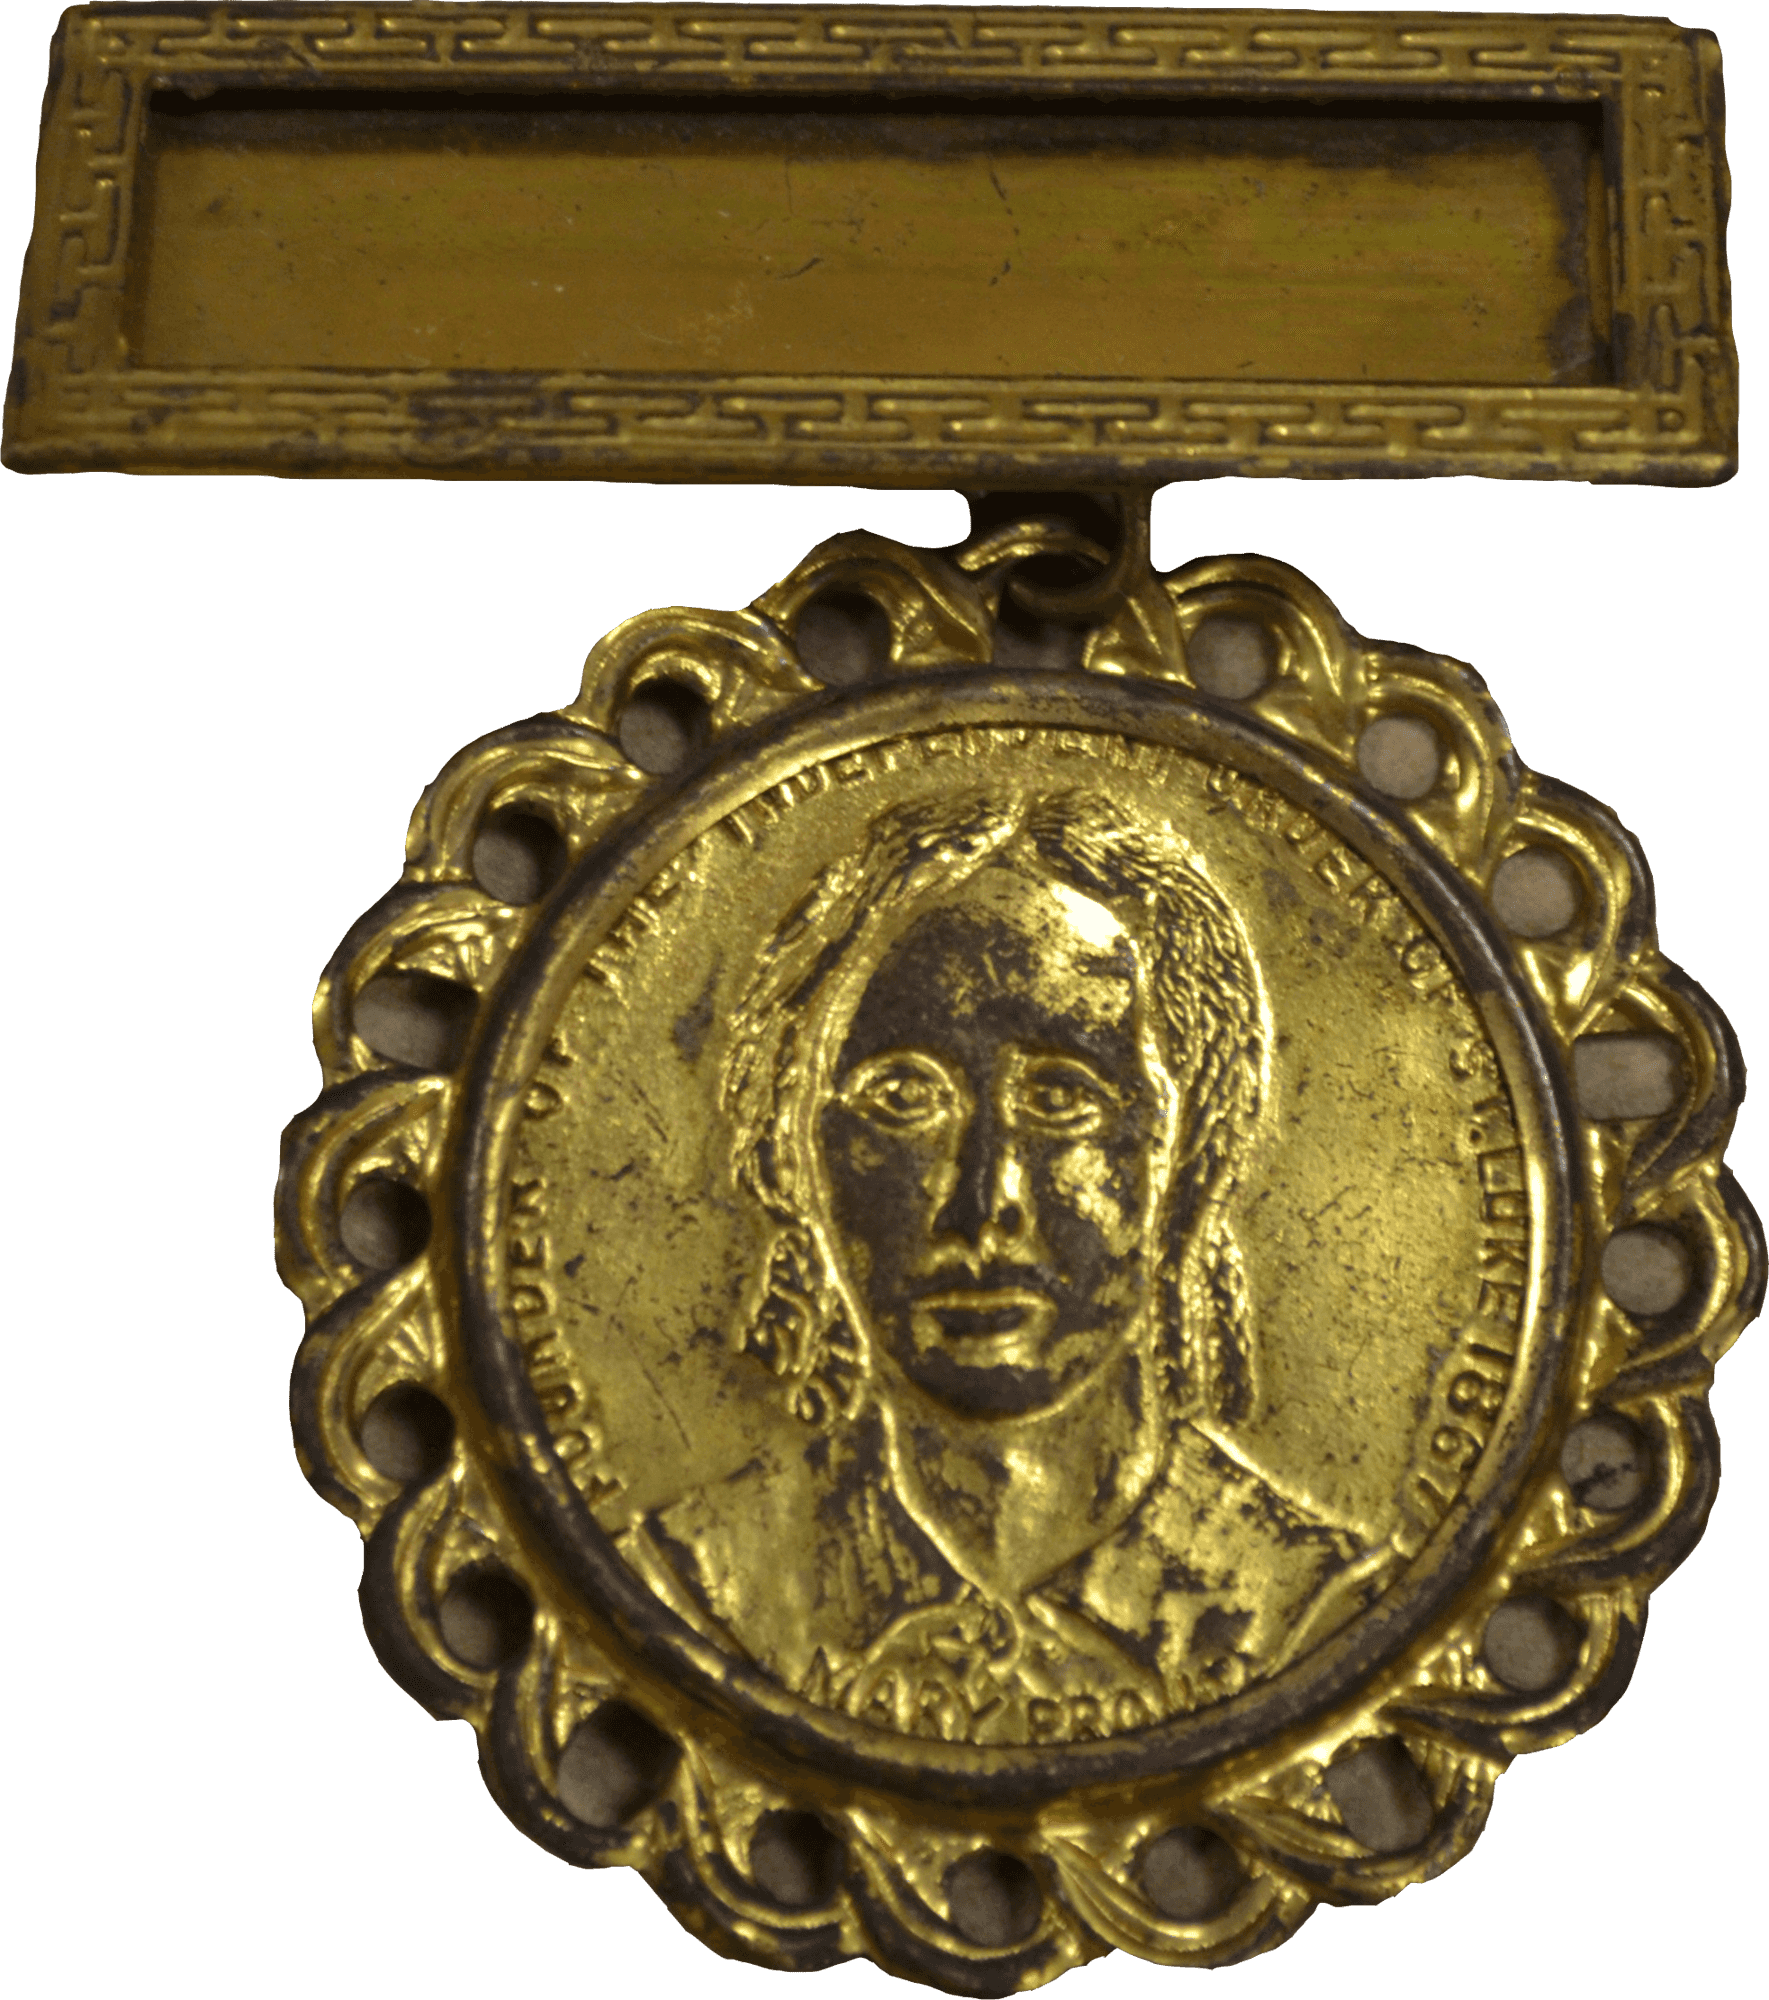 Image of pin with portrait of Independent Order of St. Luke founder Mary Prout